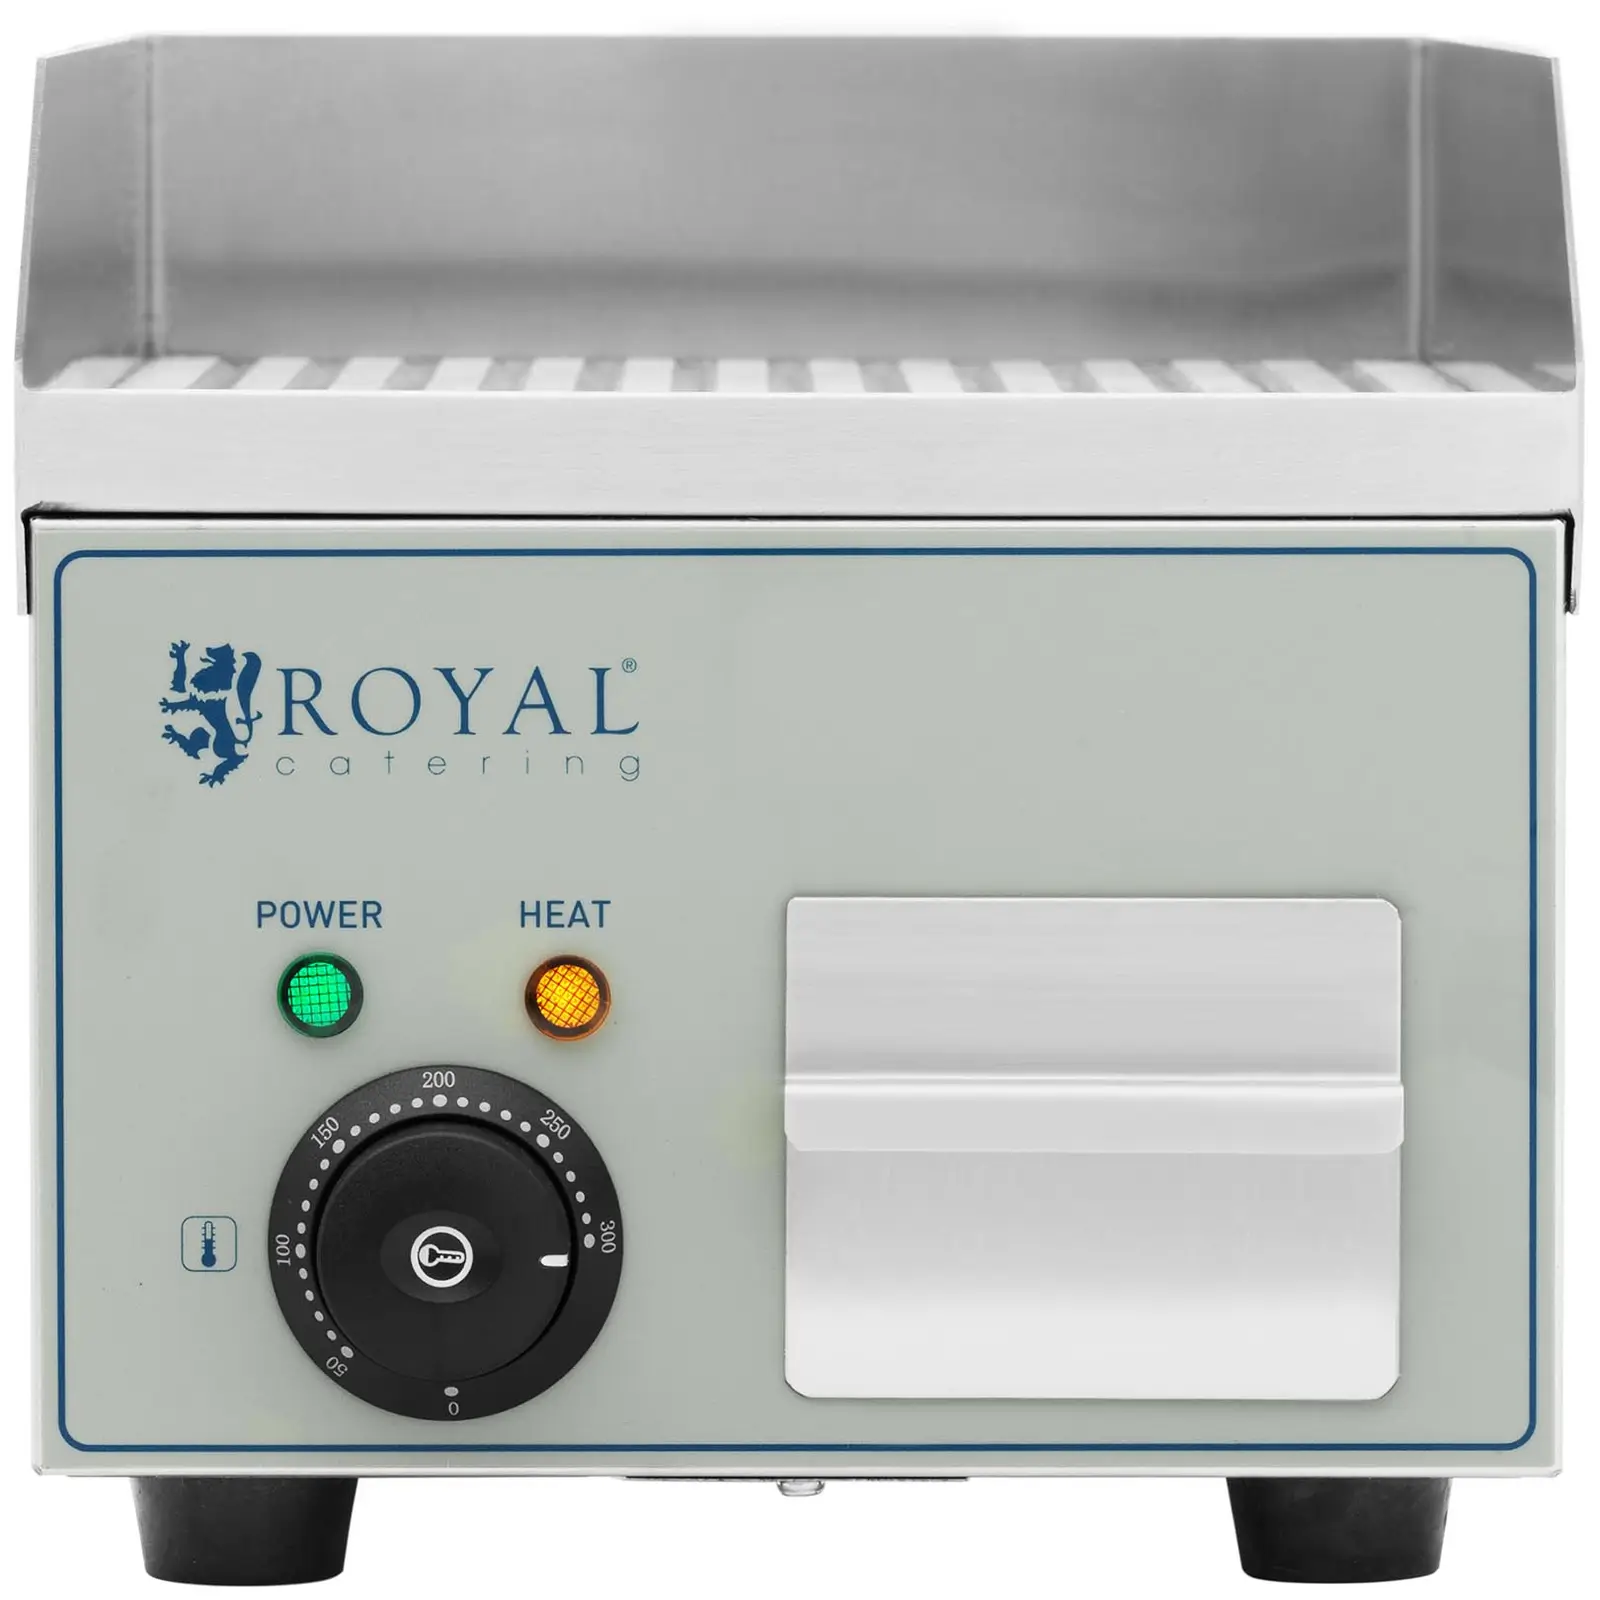 Electric Griddle - 360 x 250 mm - Royal Catering - 2,000 W